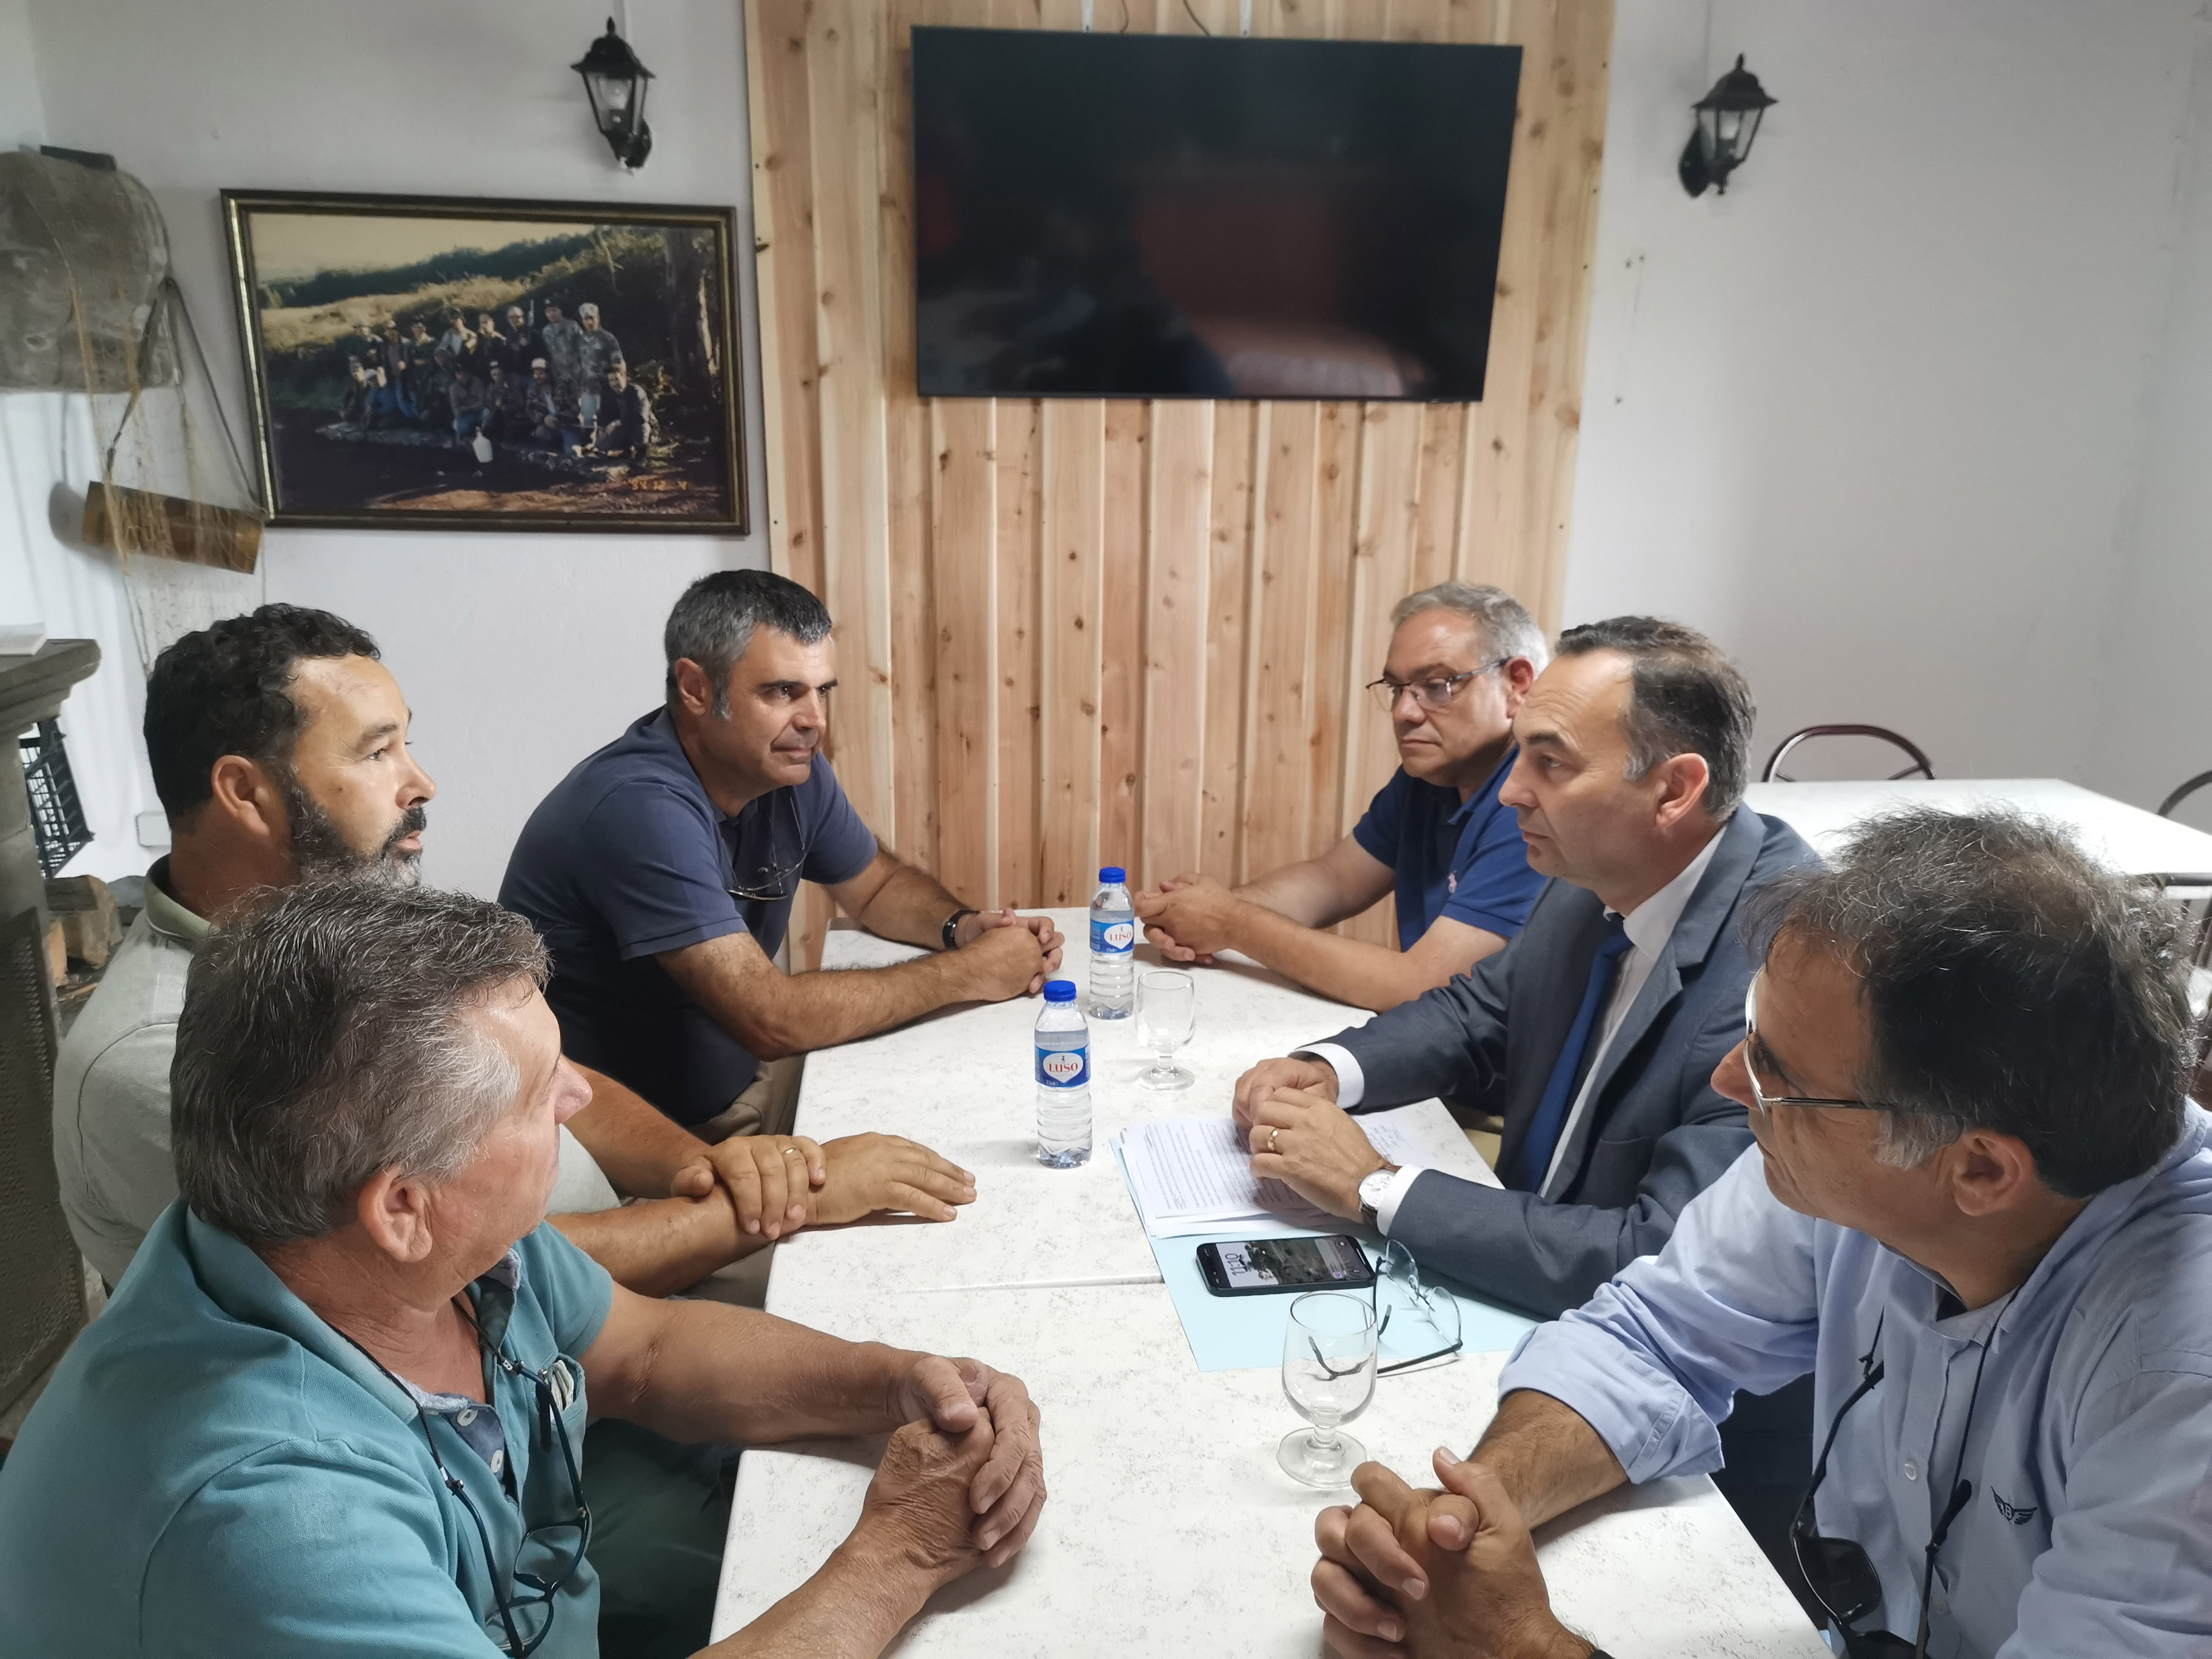 Meeting with the Directorate of the Terceirense Association of Hunters